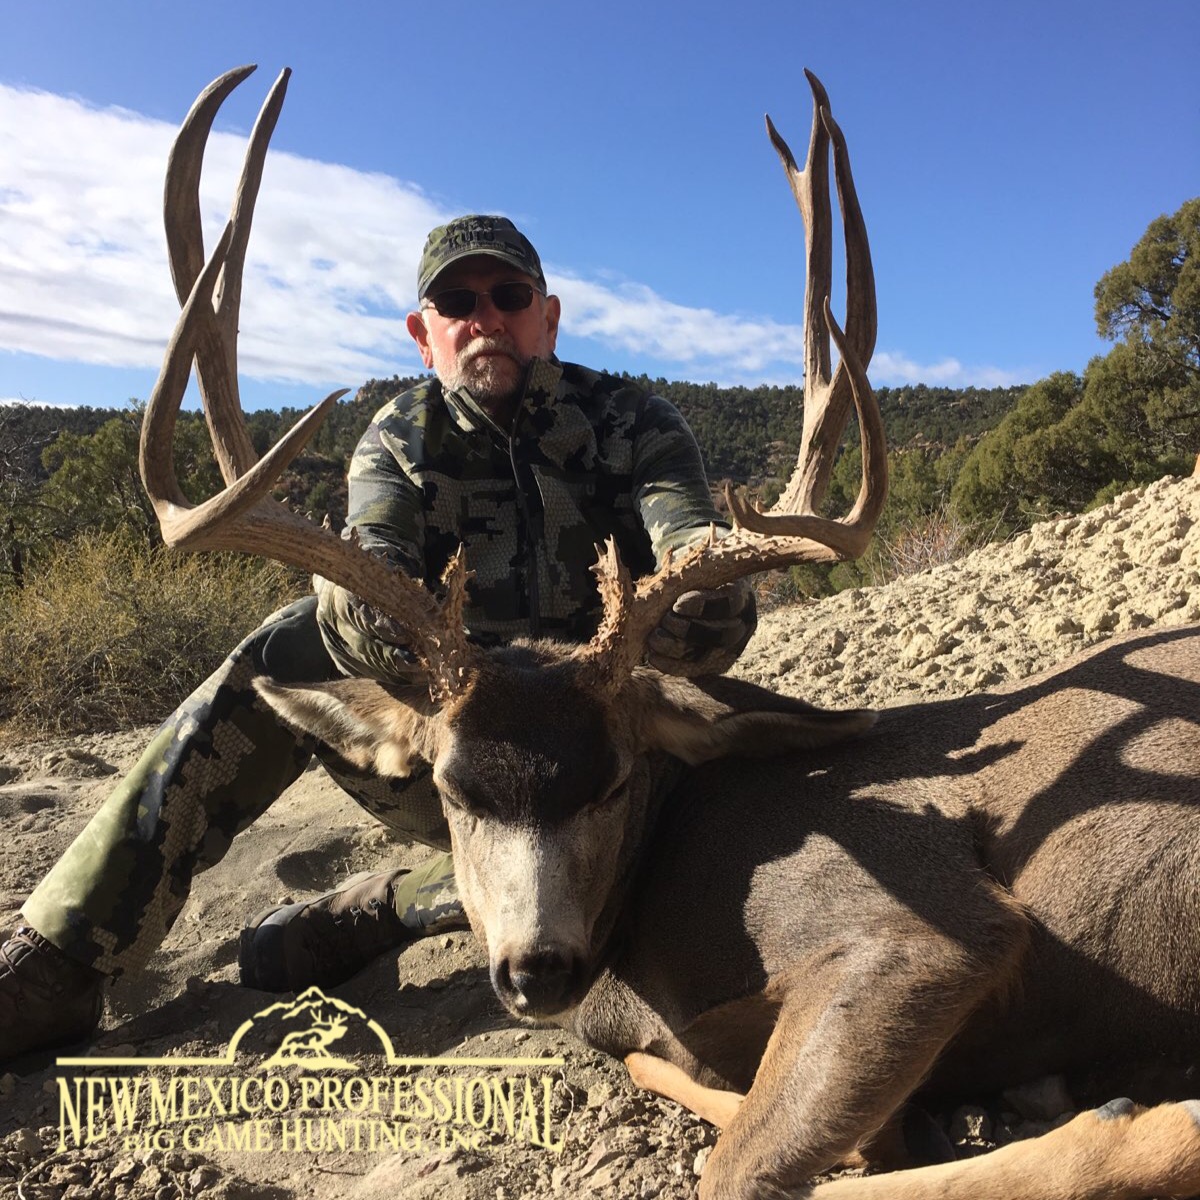 New Mexico Professional Big Game Hunting, Inc.